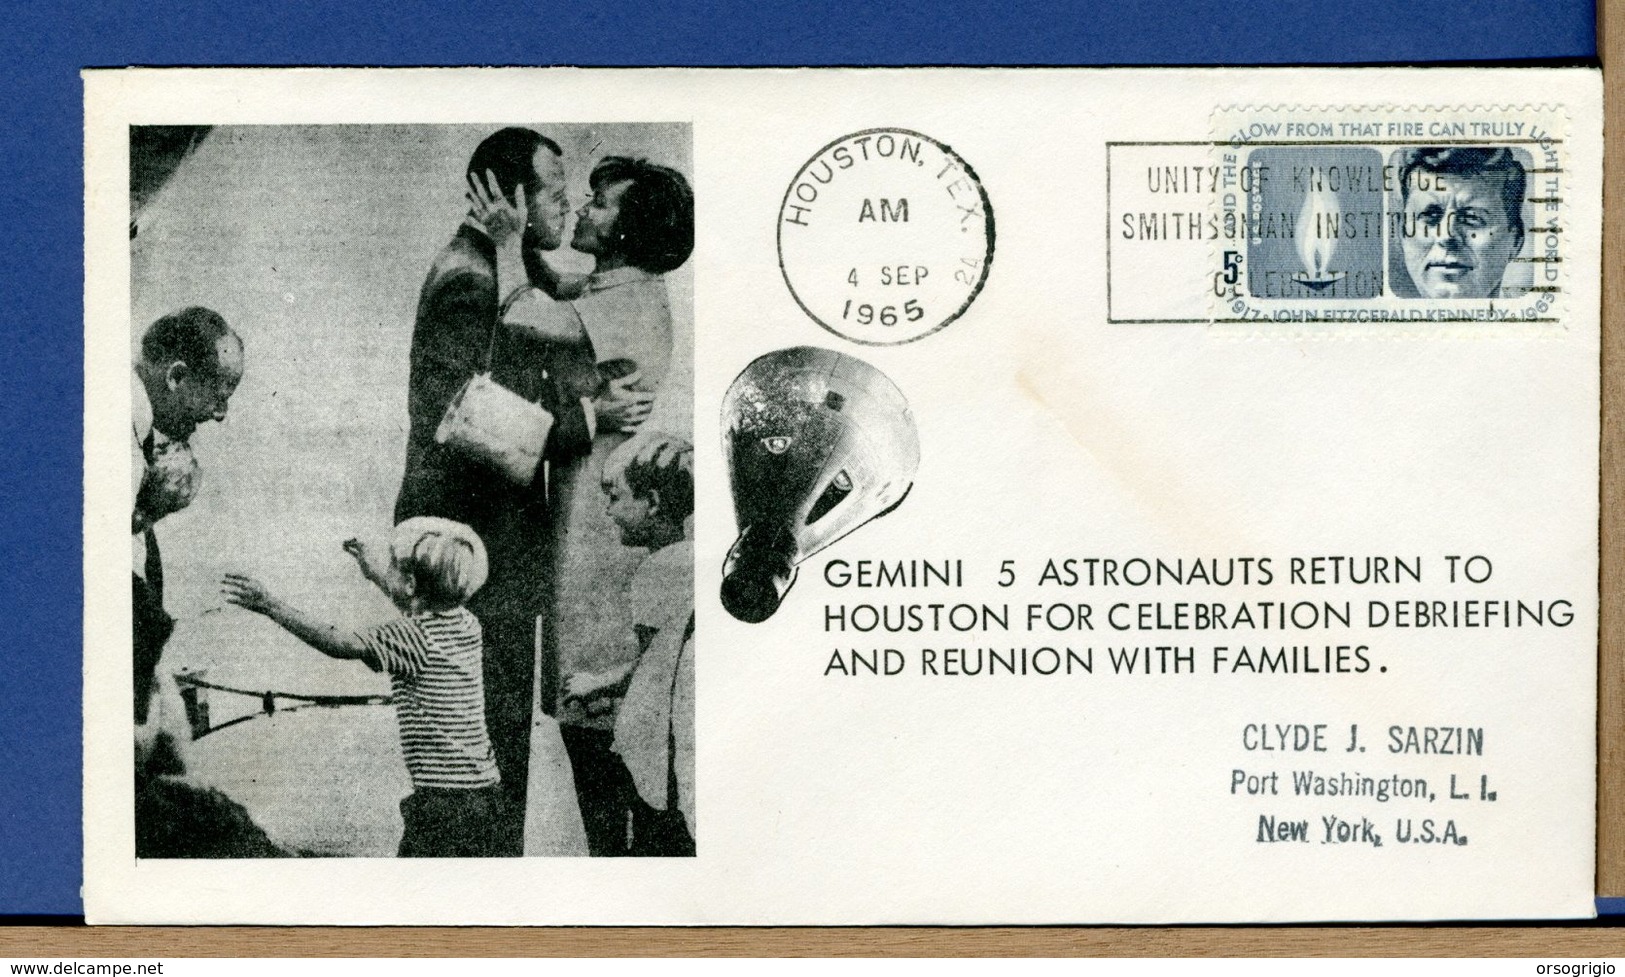 USA - 1965 - GEMINI GT-5 - 8 DAYS IN SPACE - ASTRONAUT CONRAD And COOPER RETURN TO HOUSTON - REUNION WITH FAMILIES - Stati Uniti